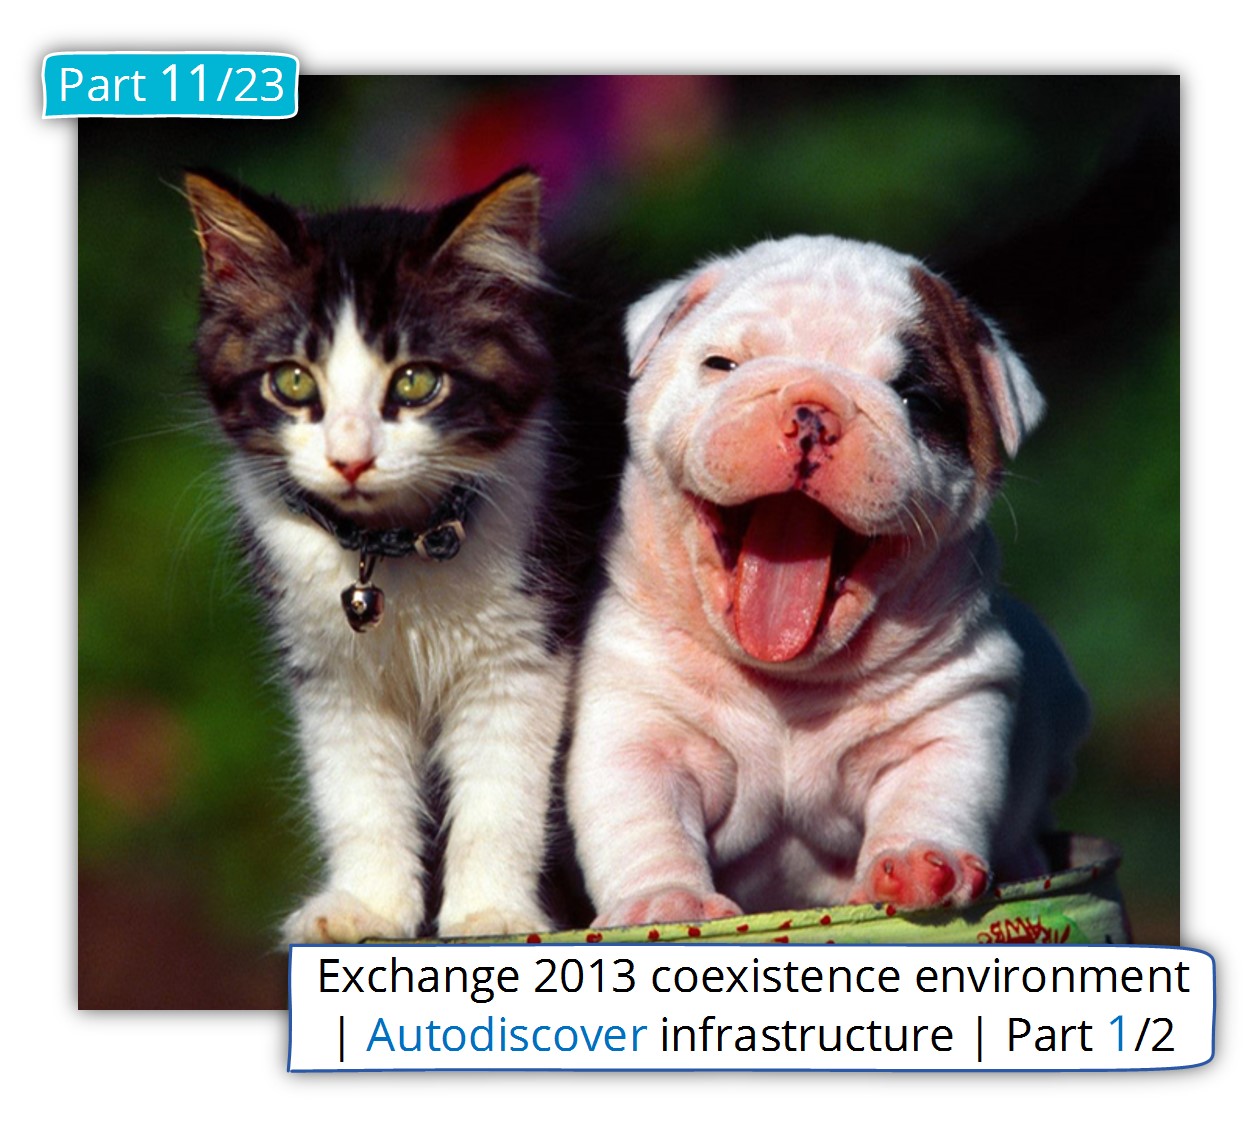 Exchange 2013 coexistence environment | Autodiscover infrastructure | Part 1/2